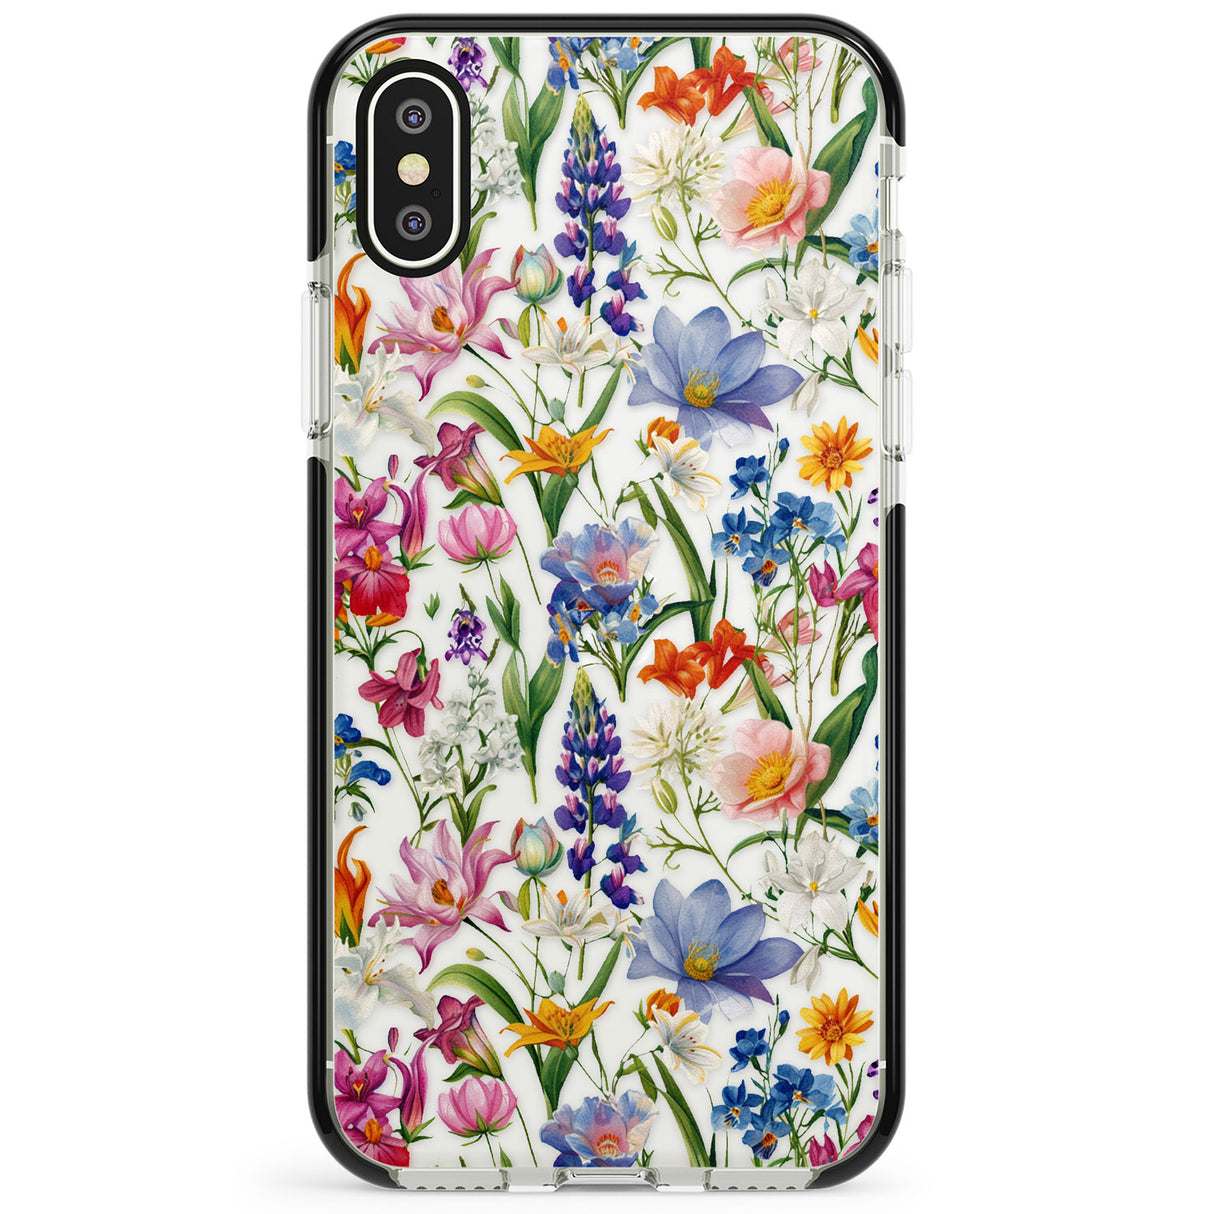 Vintage Wildflowers Phone Case for iPhone X XS Max XR